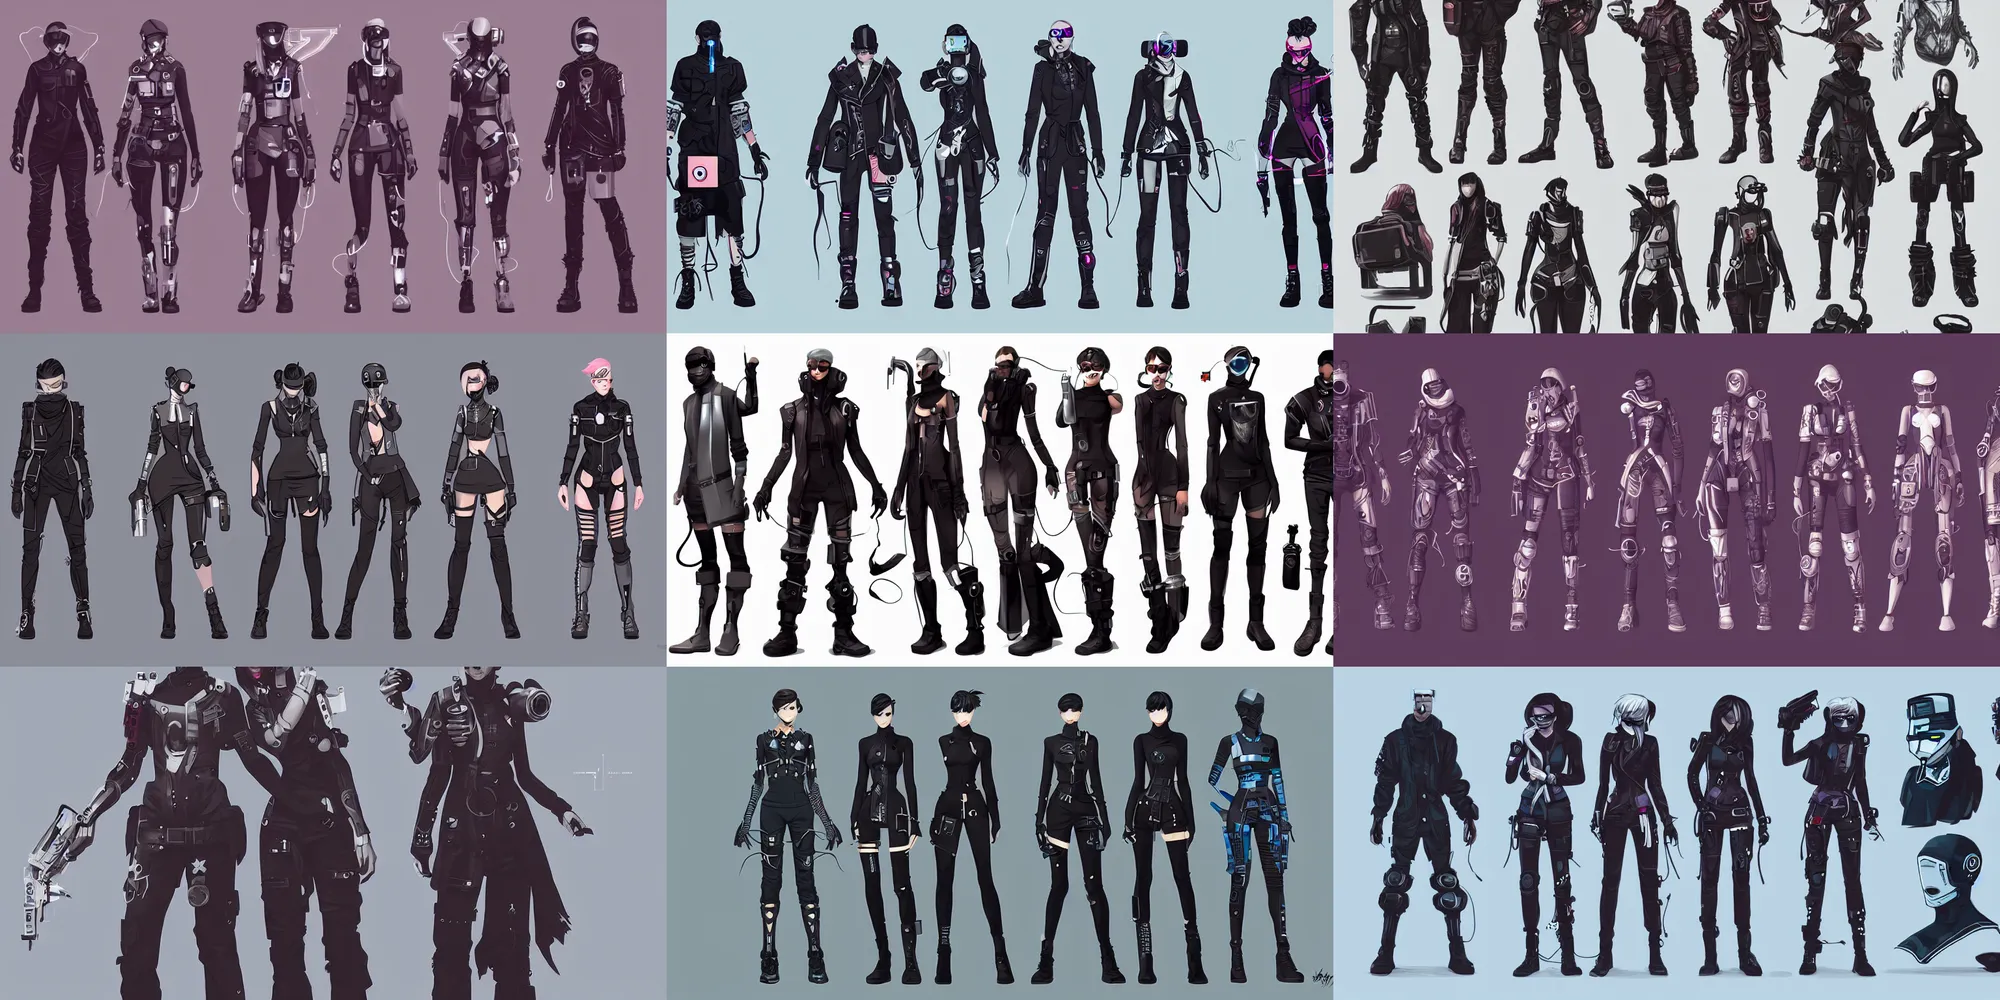 Prompt: collection of character design, futuristic, medic, cyberpunk, fantasy, trendy fashion, elegant, collection, pack